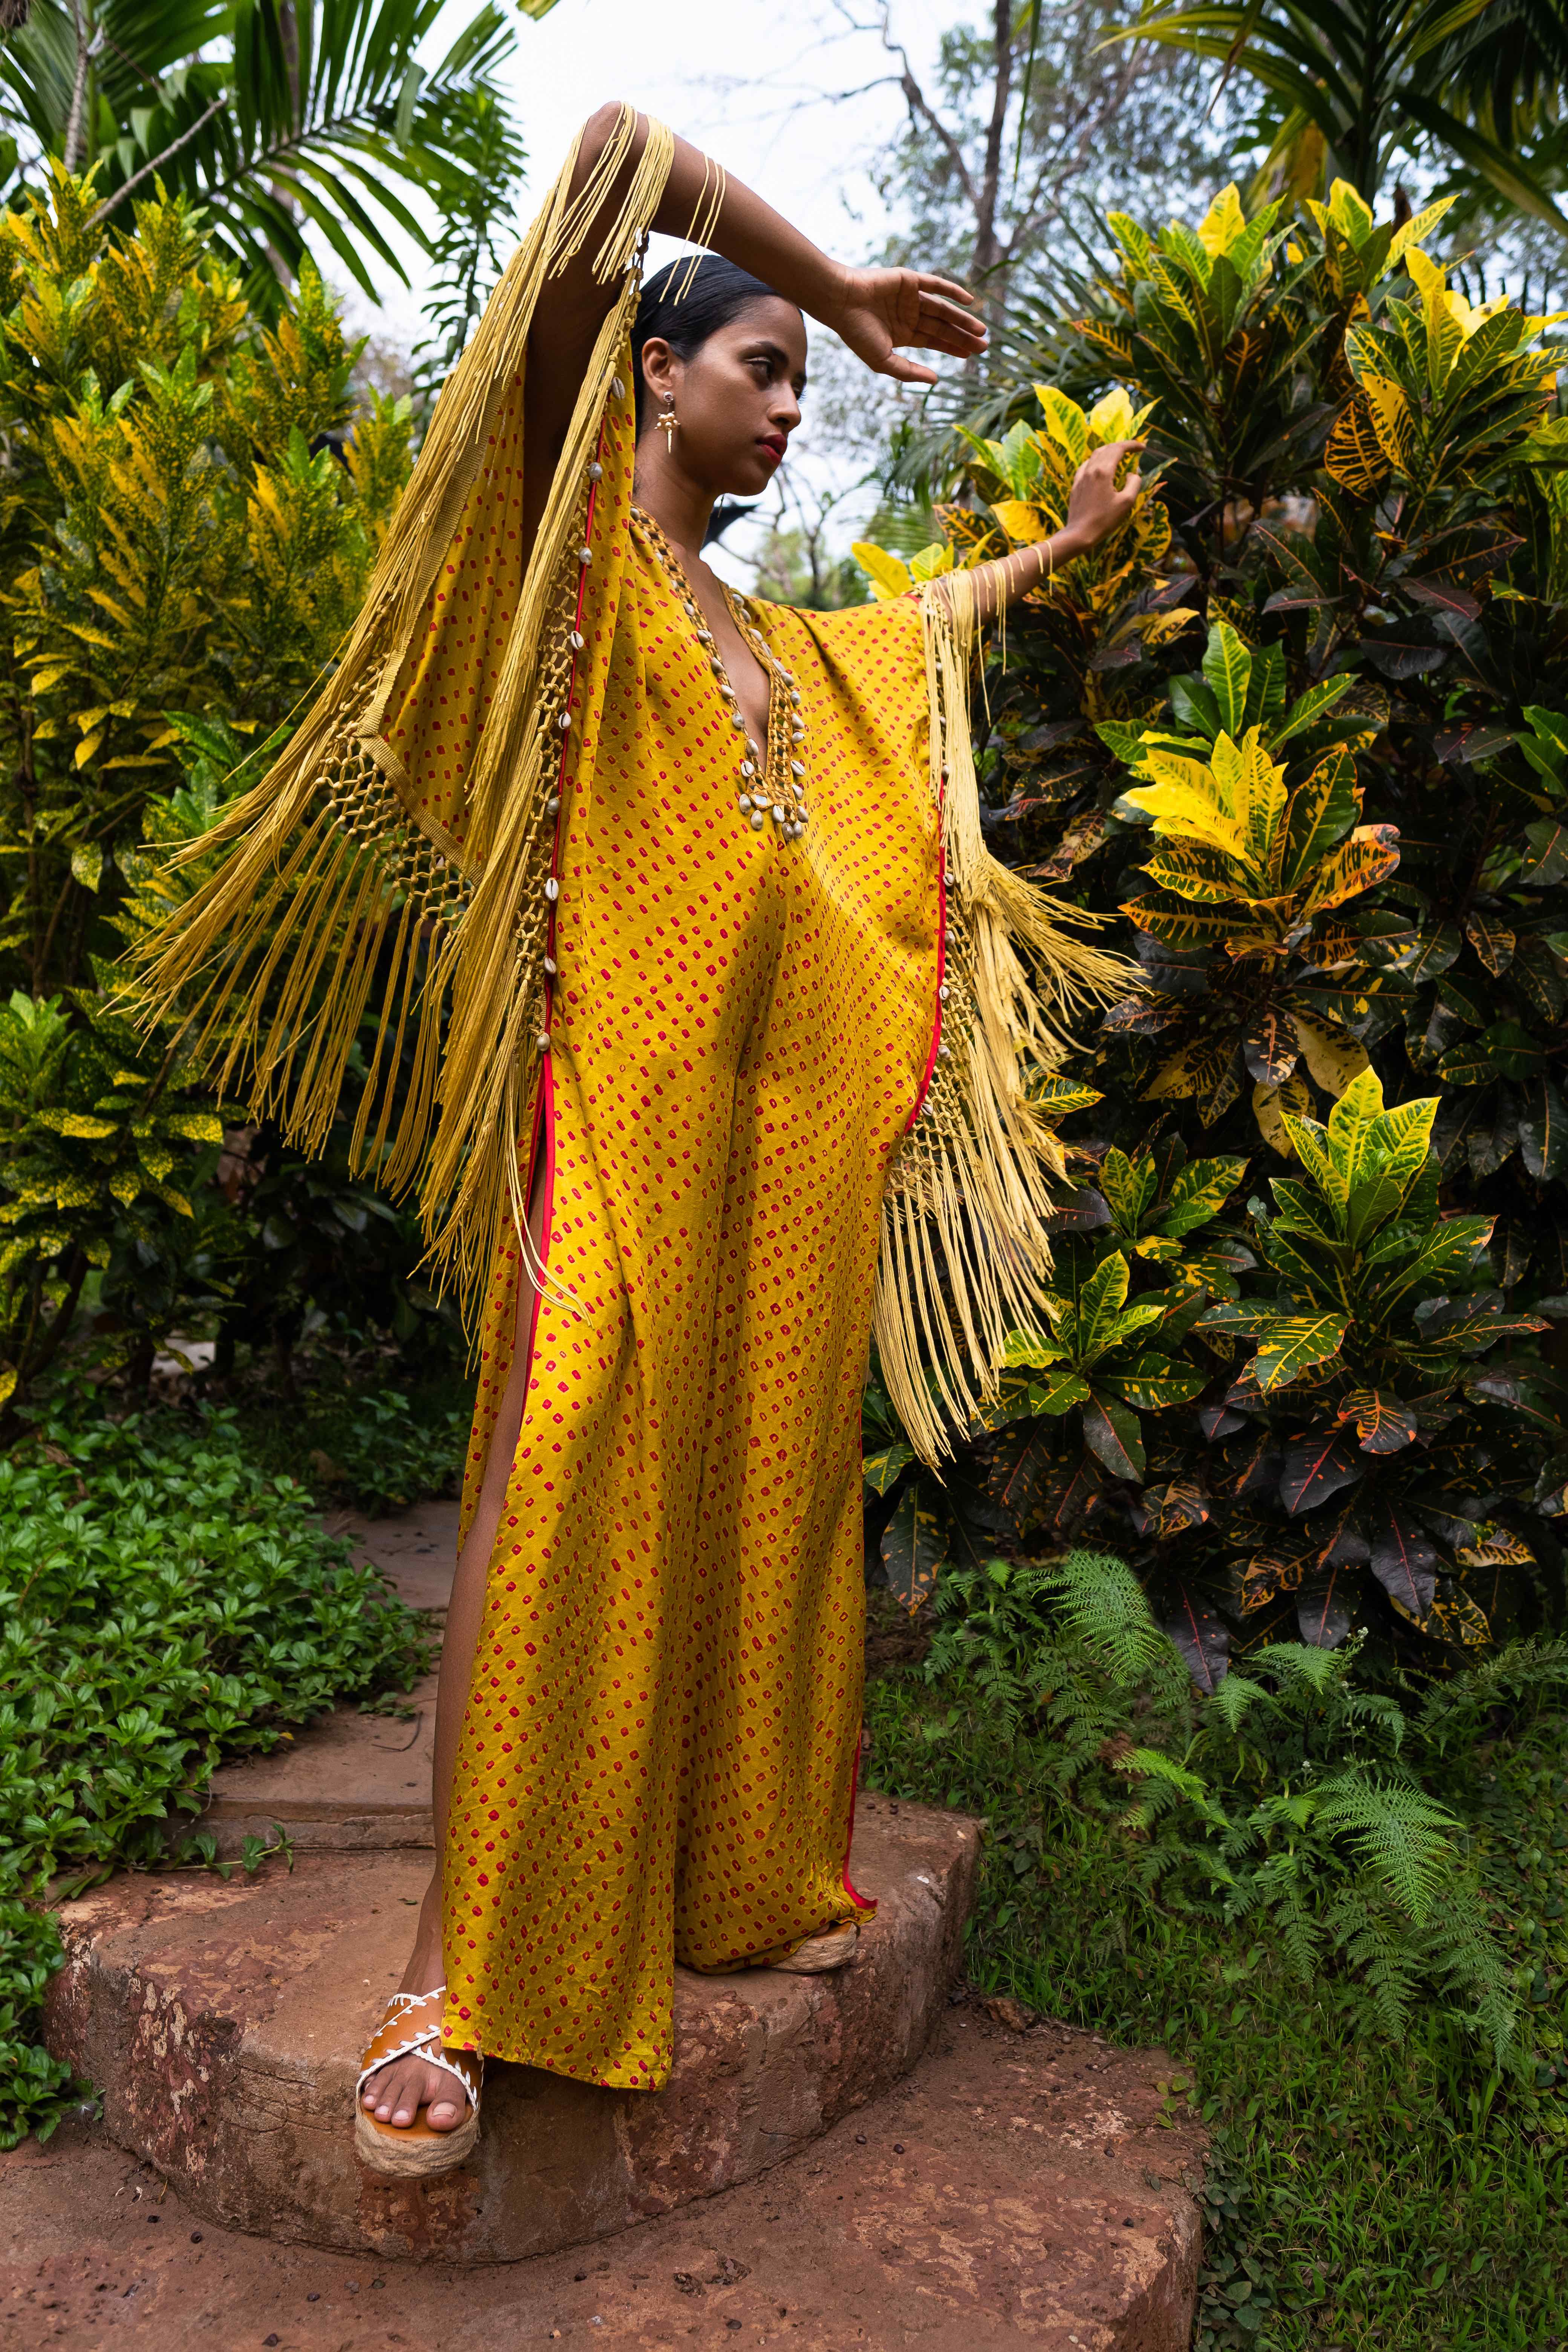 model wearing full-length yellow silk v-neck dress with fringe by Indian fashion designer Surily DP Goel standing outdoors in front of green lush plants